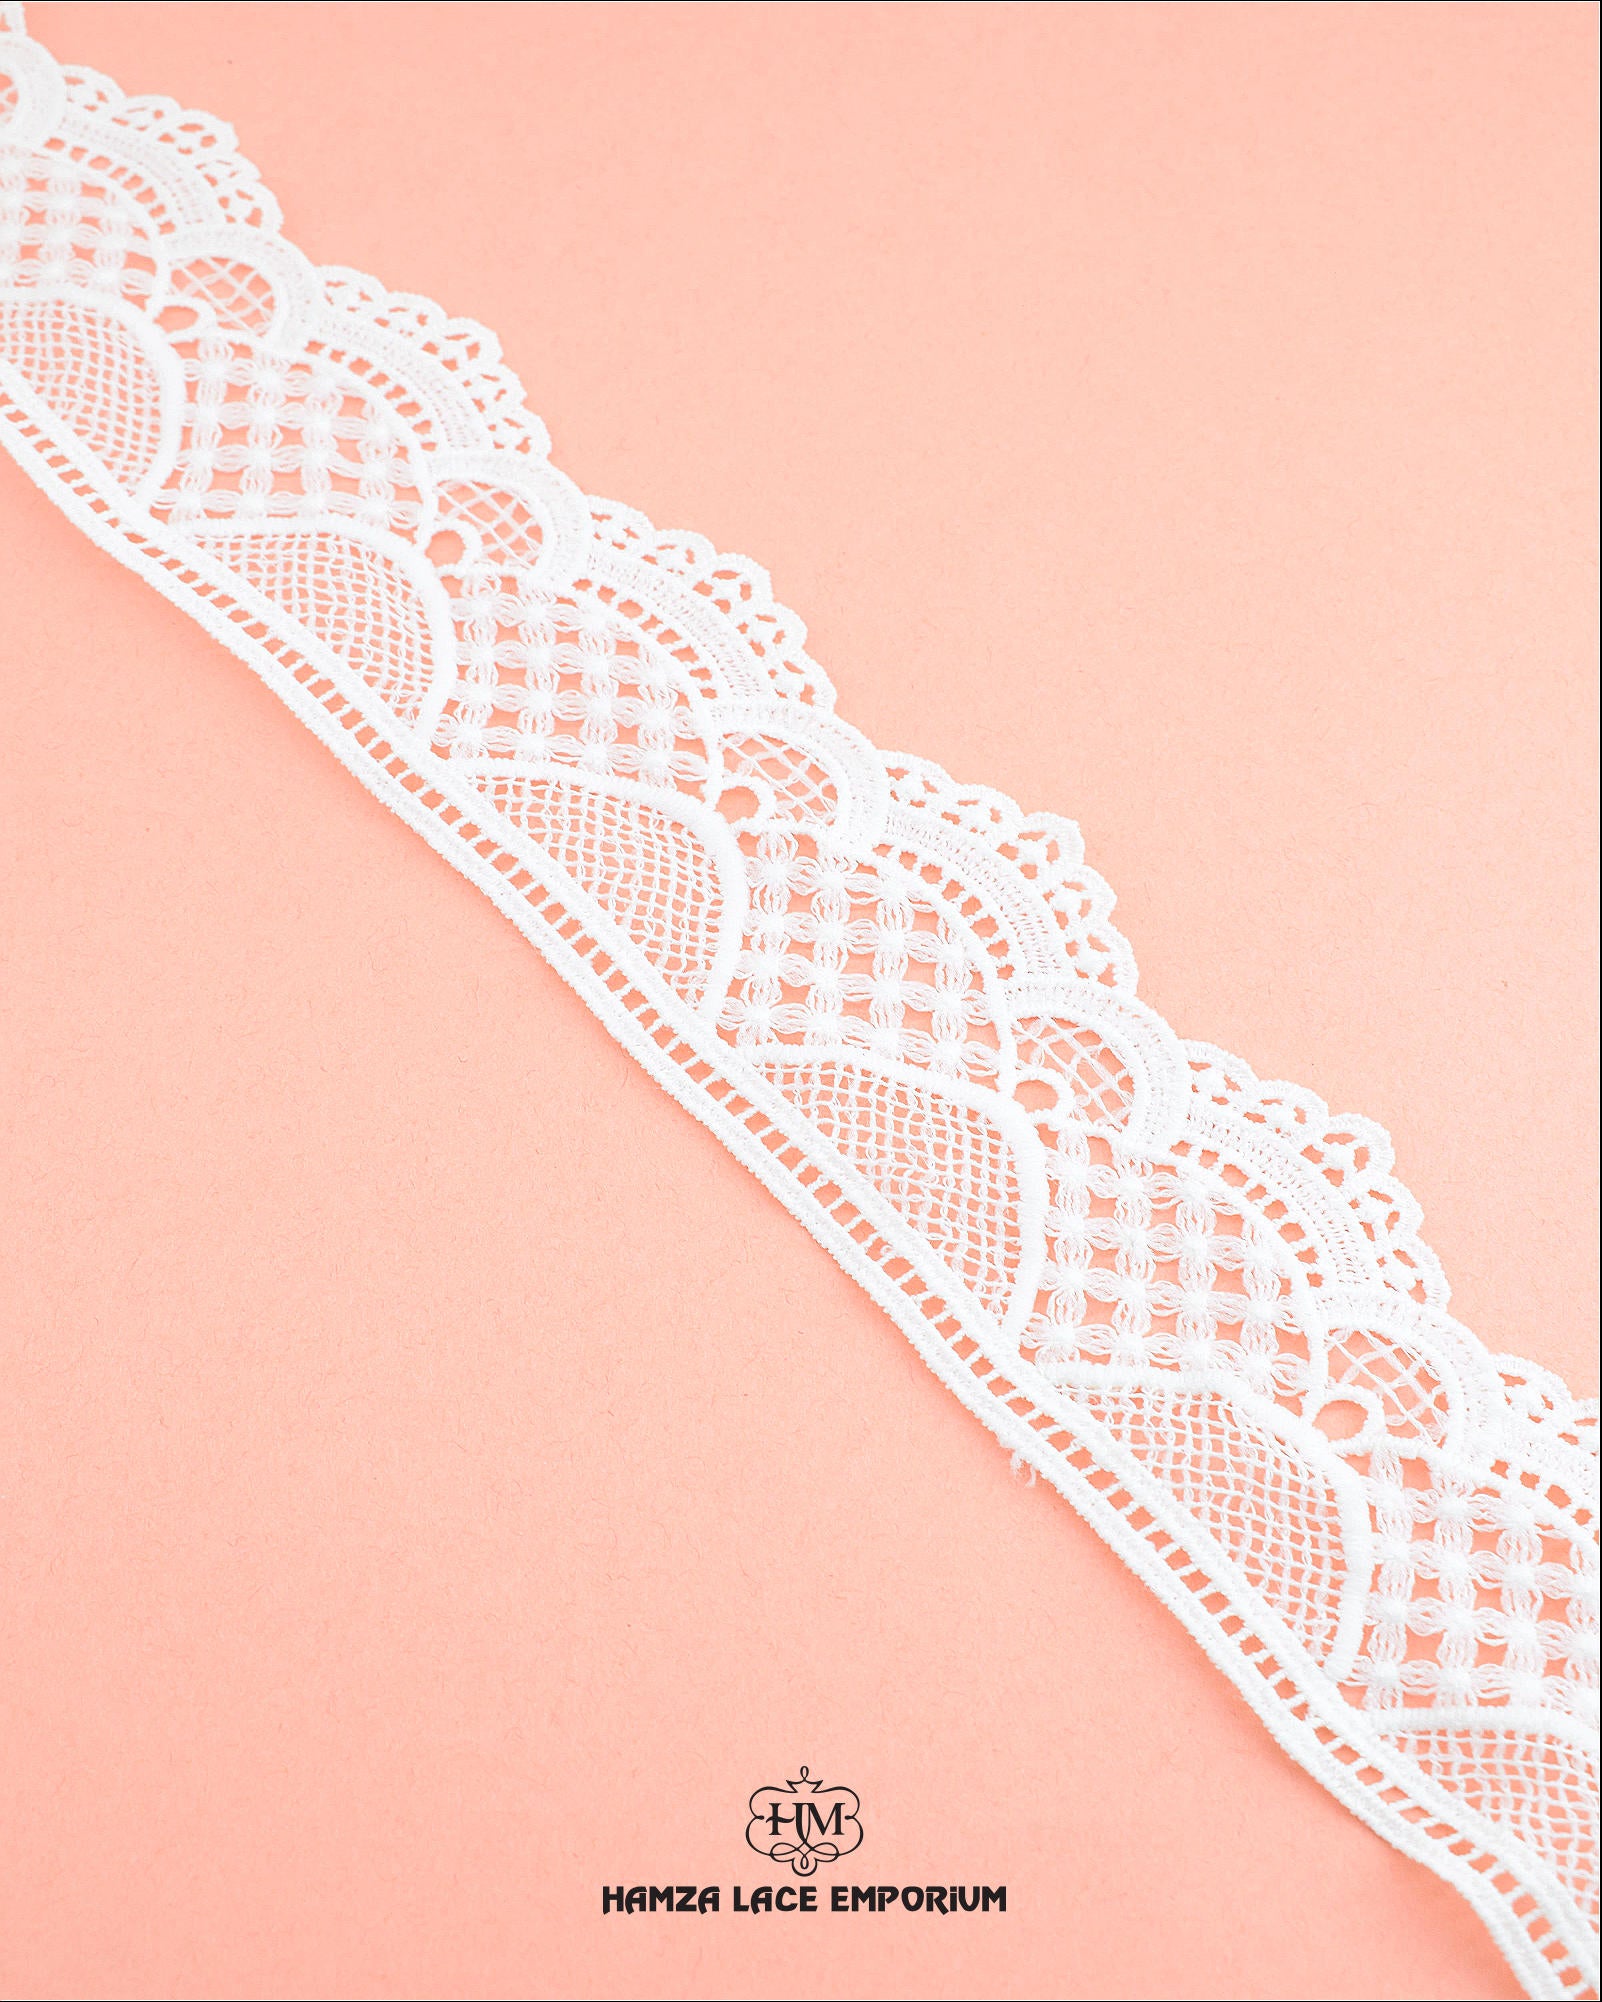 The "Edging Scallop Lace 23439" with the "Hamza Lace" sign at the bottom